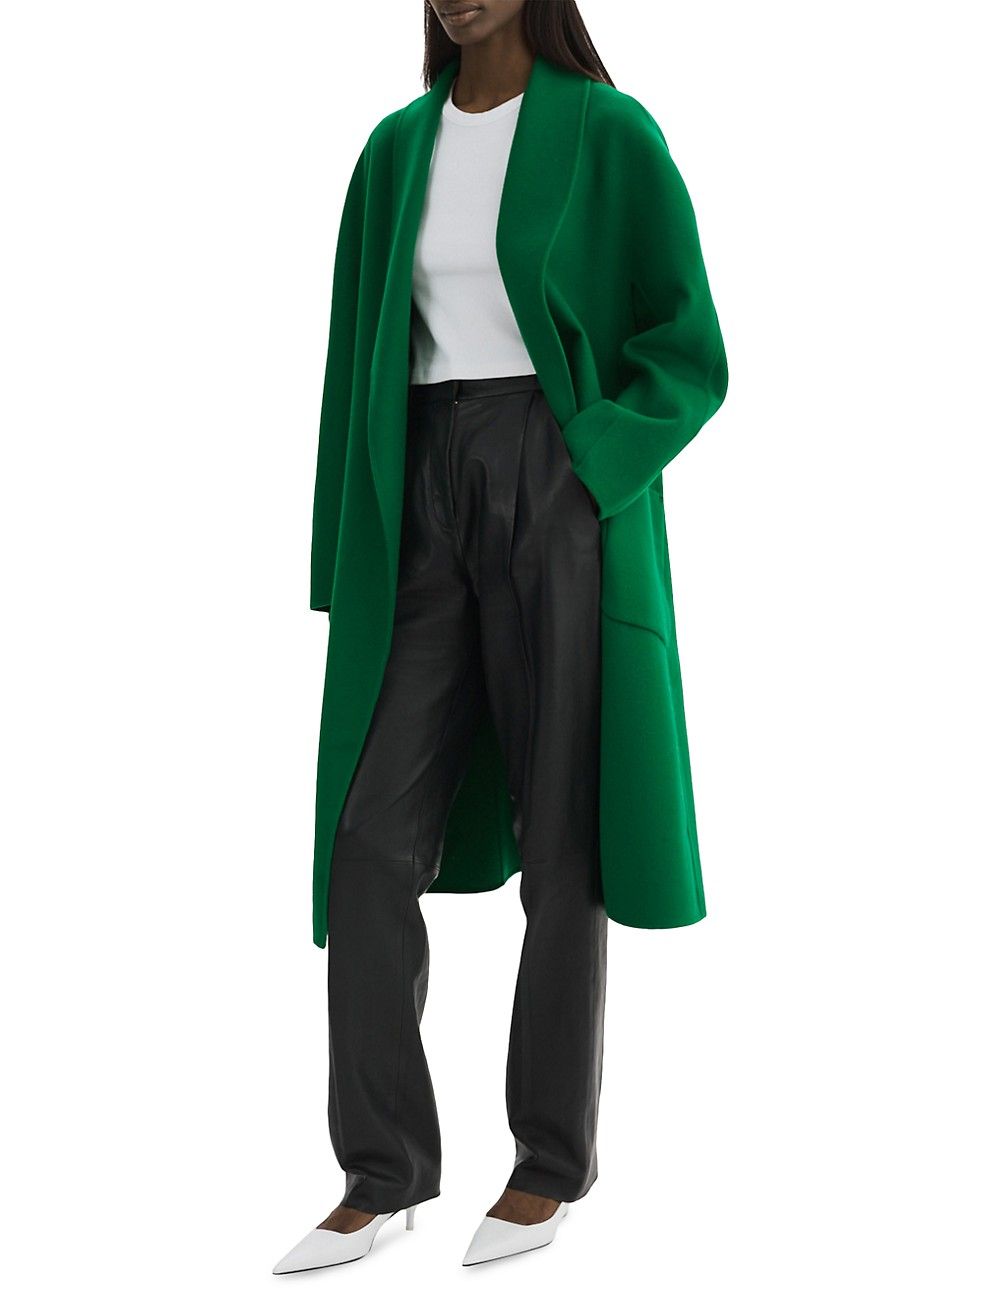 LAMARQUE Thara Double-Faced Wool Coat | Saks Fifth Avenue